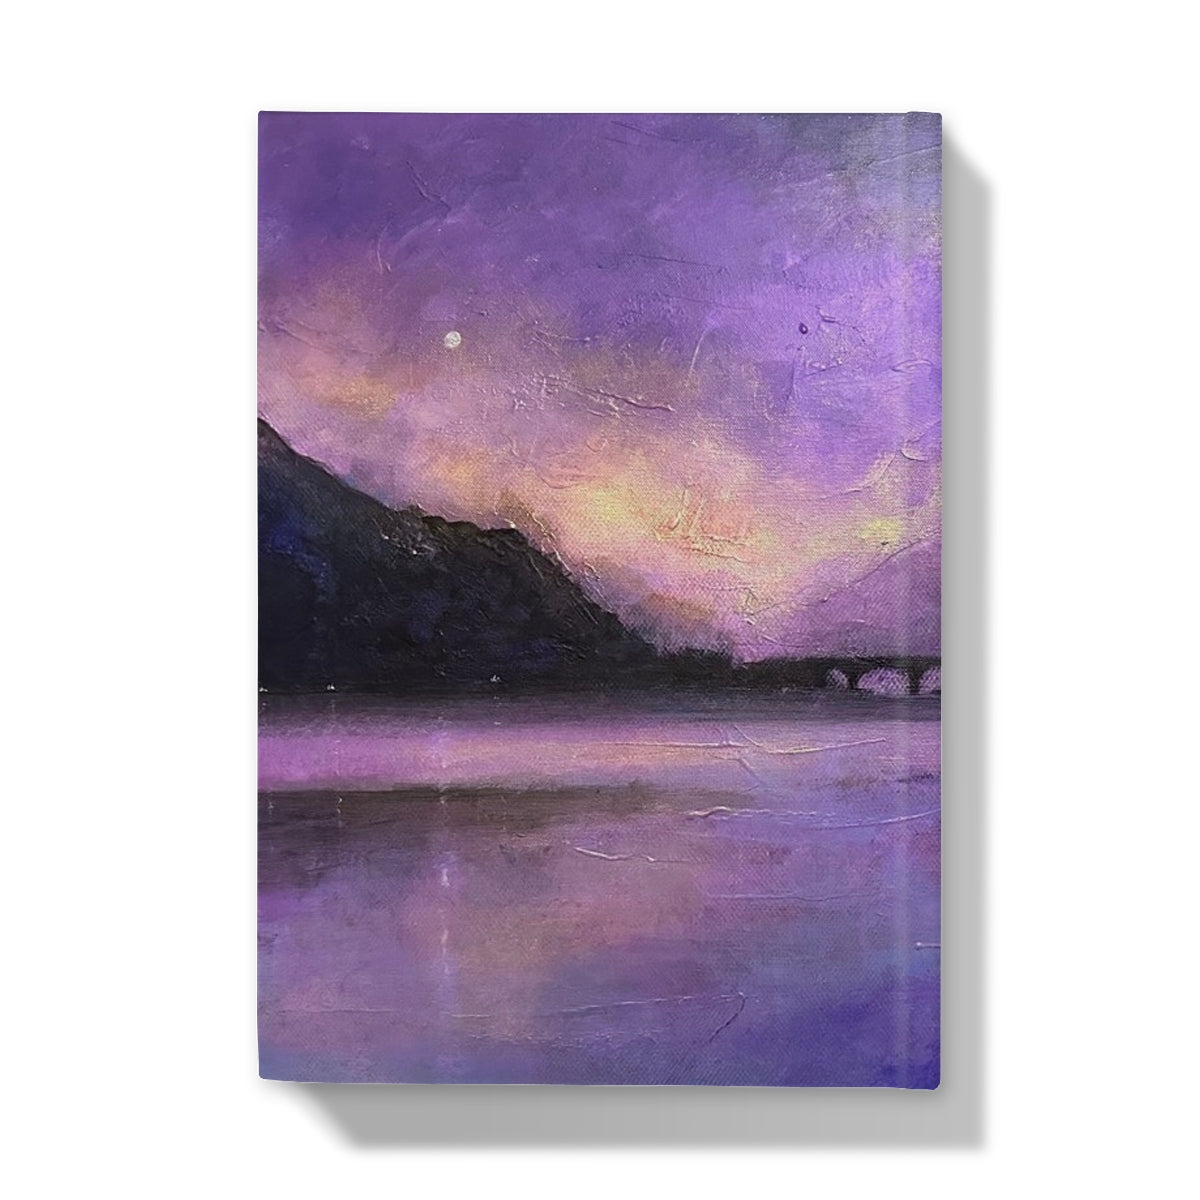 Eilean Donan Castle Moonset Art Gifts Hardback Journal-Journals & Notebooks-Historic & Iconic Scotland Art Gallery-Paintings, Prints, Homeware, Art Gifts From Scotland By Scottish Artist Kevin Hunter